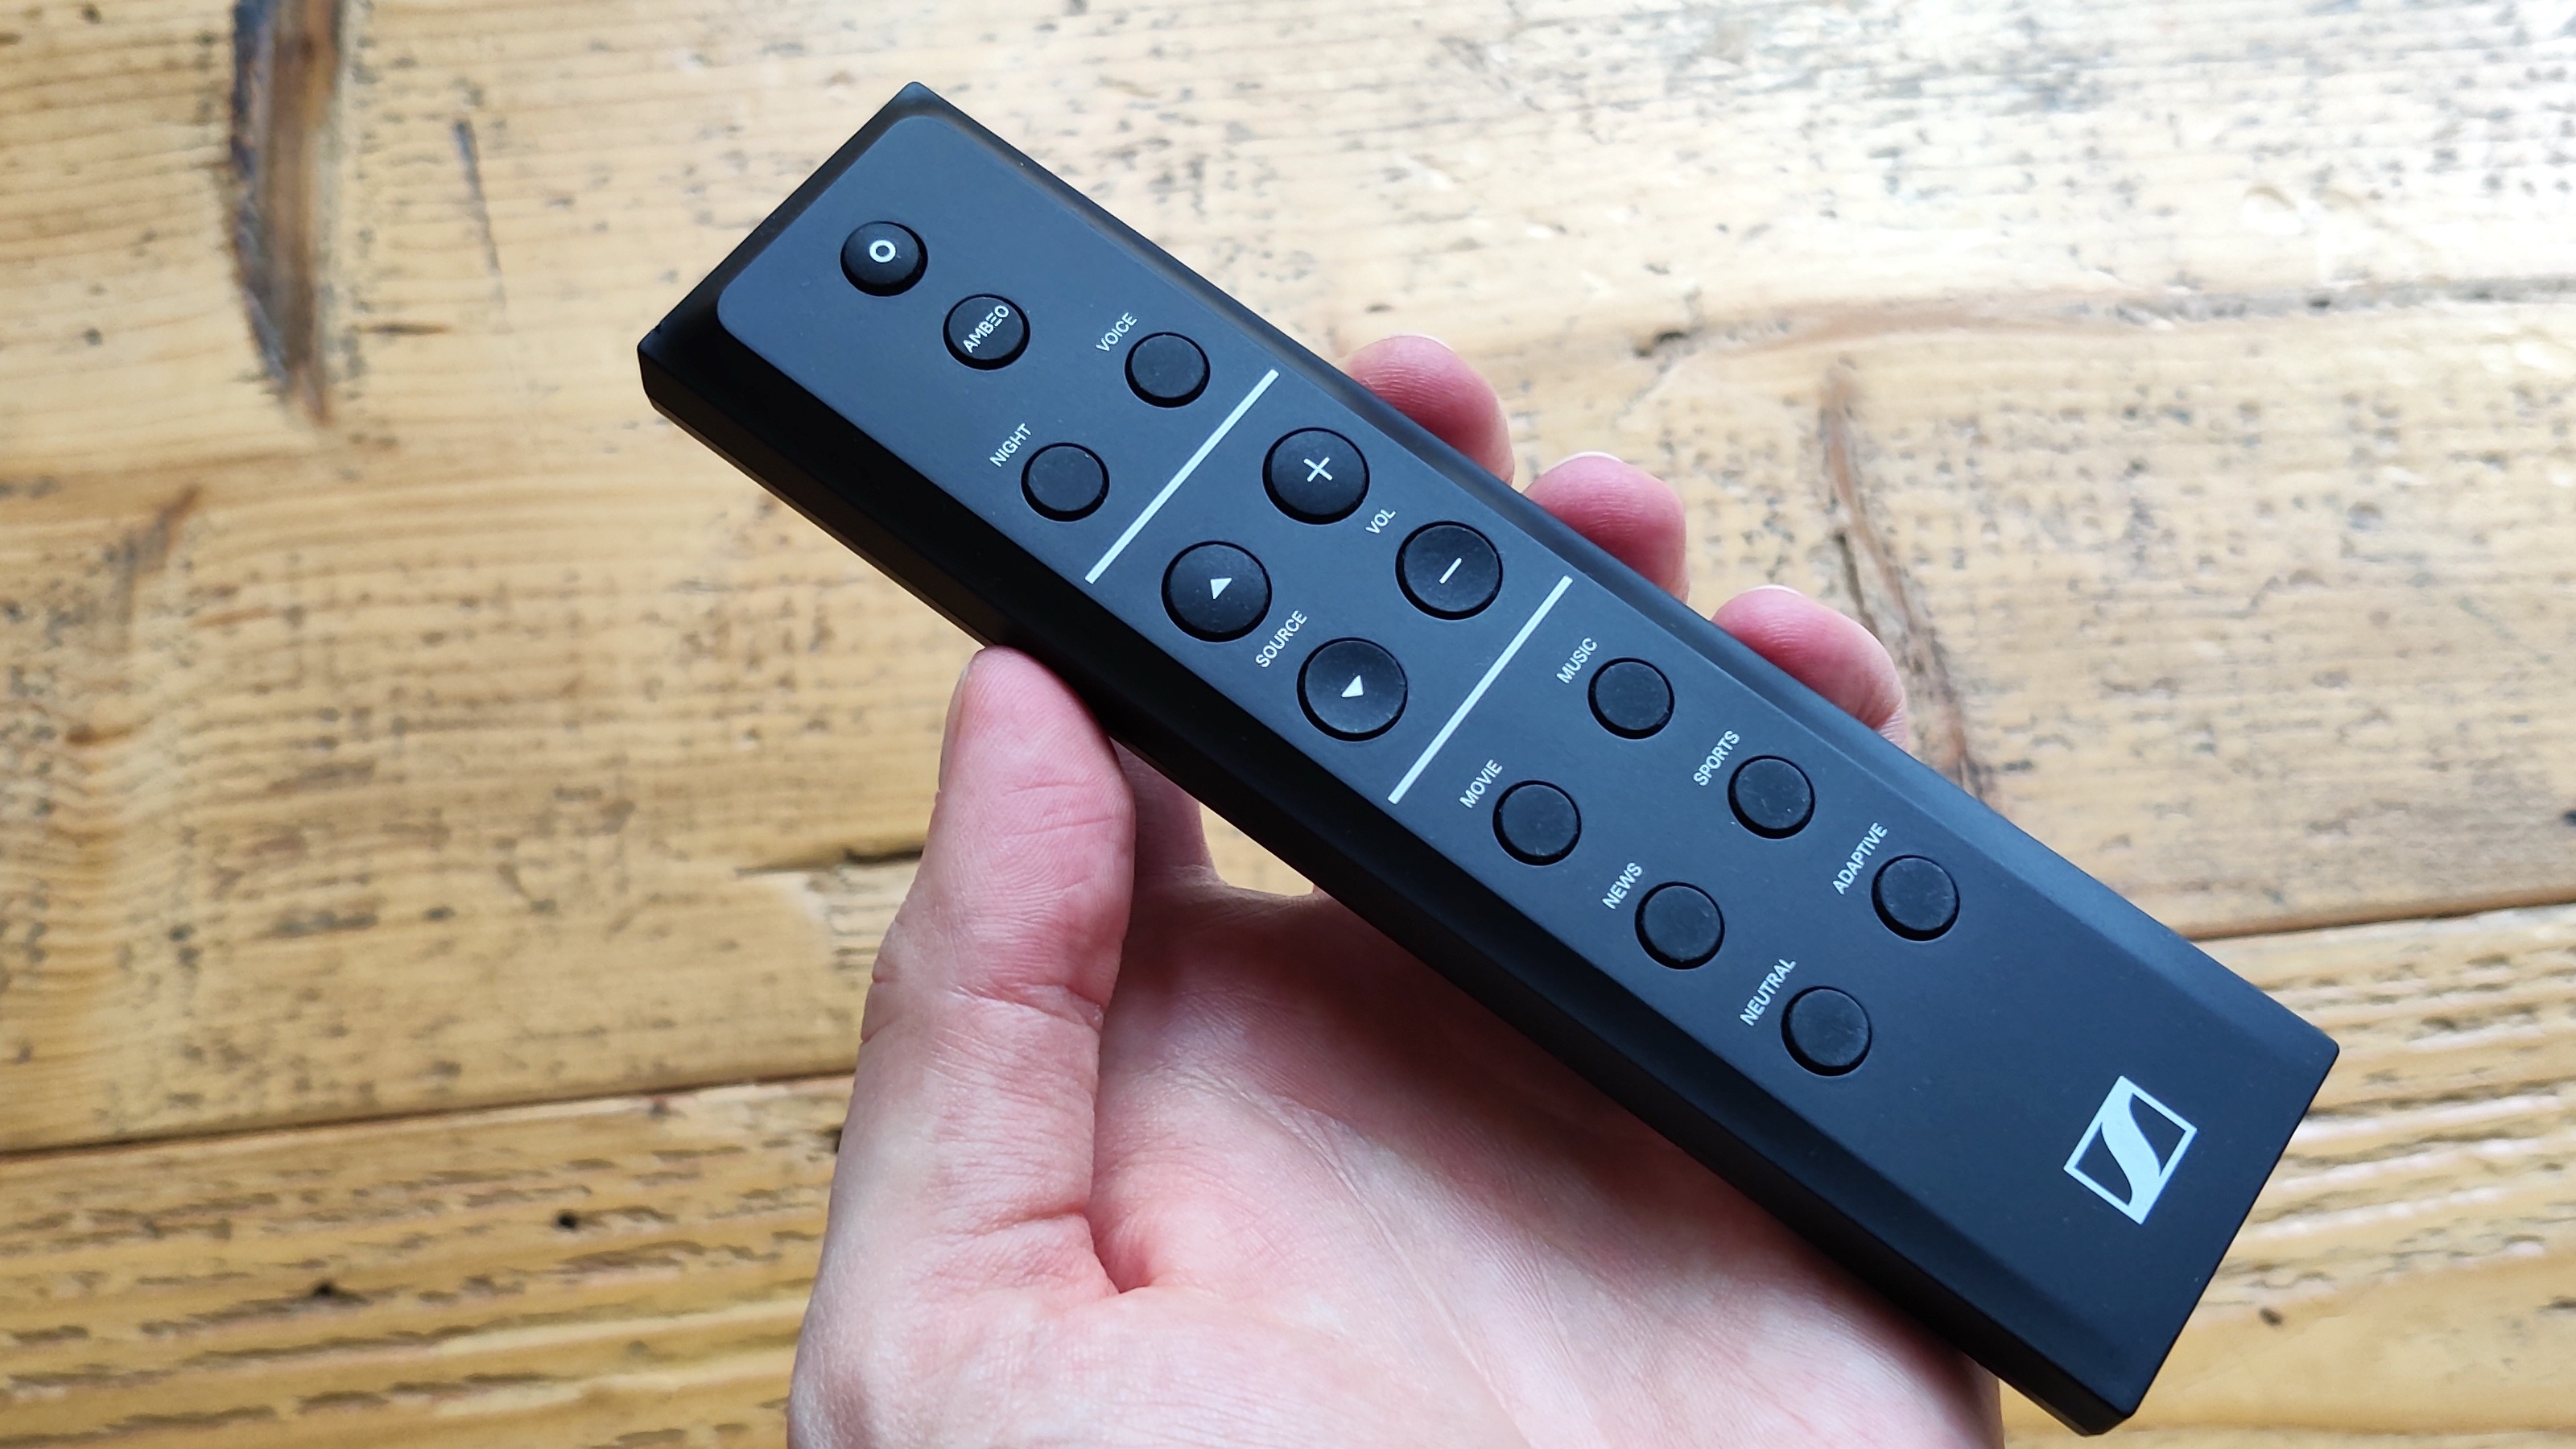 The Sennheiser Ambeo Soundbar Plus remote held in someone's hand above a wooden surface